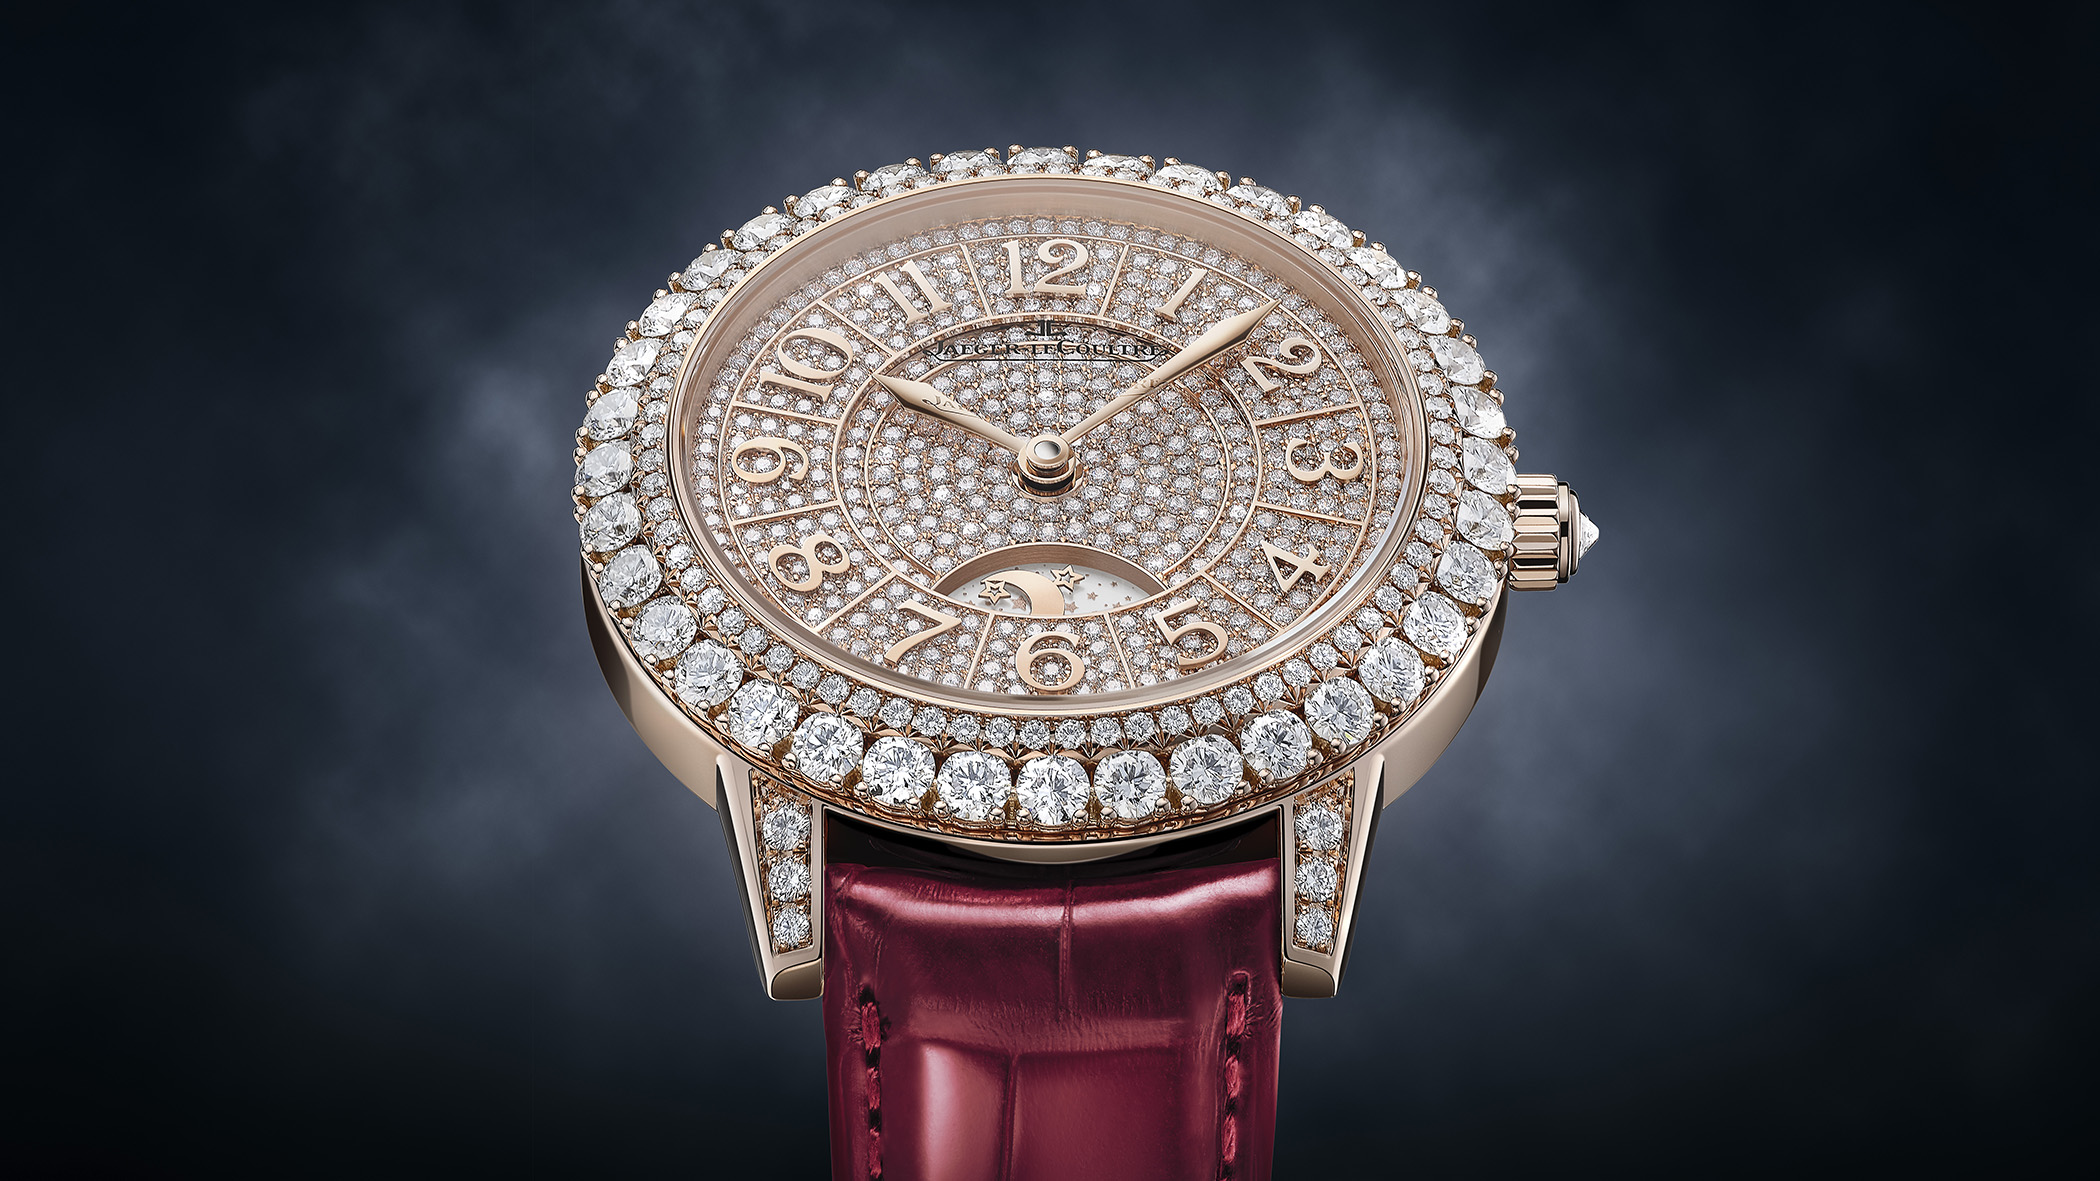 Jaeger-LeCoultre's Rendez-Vous Dazzling Night & Day Collection